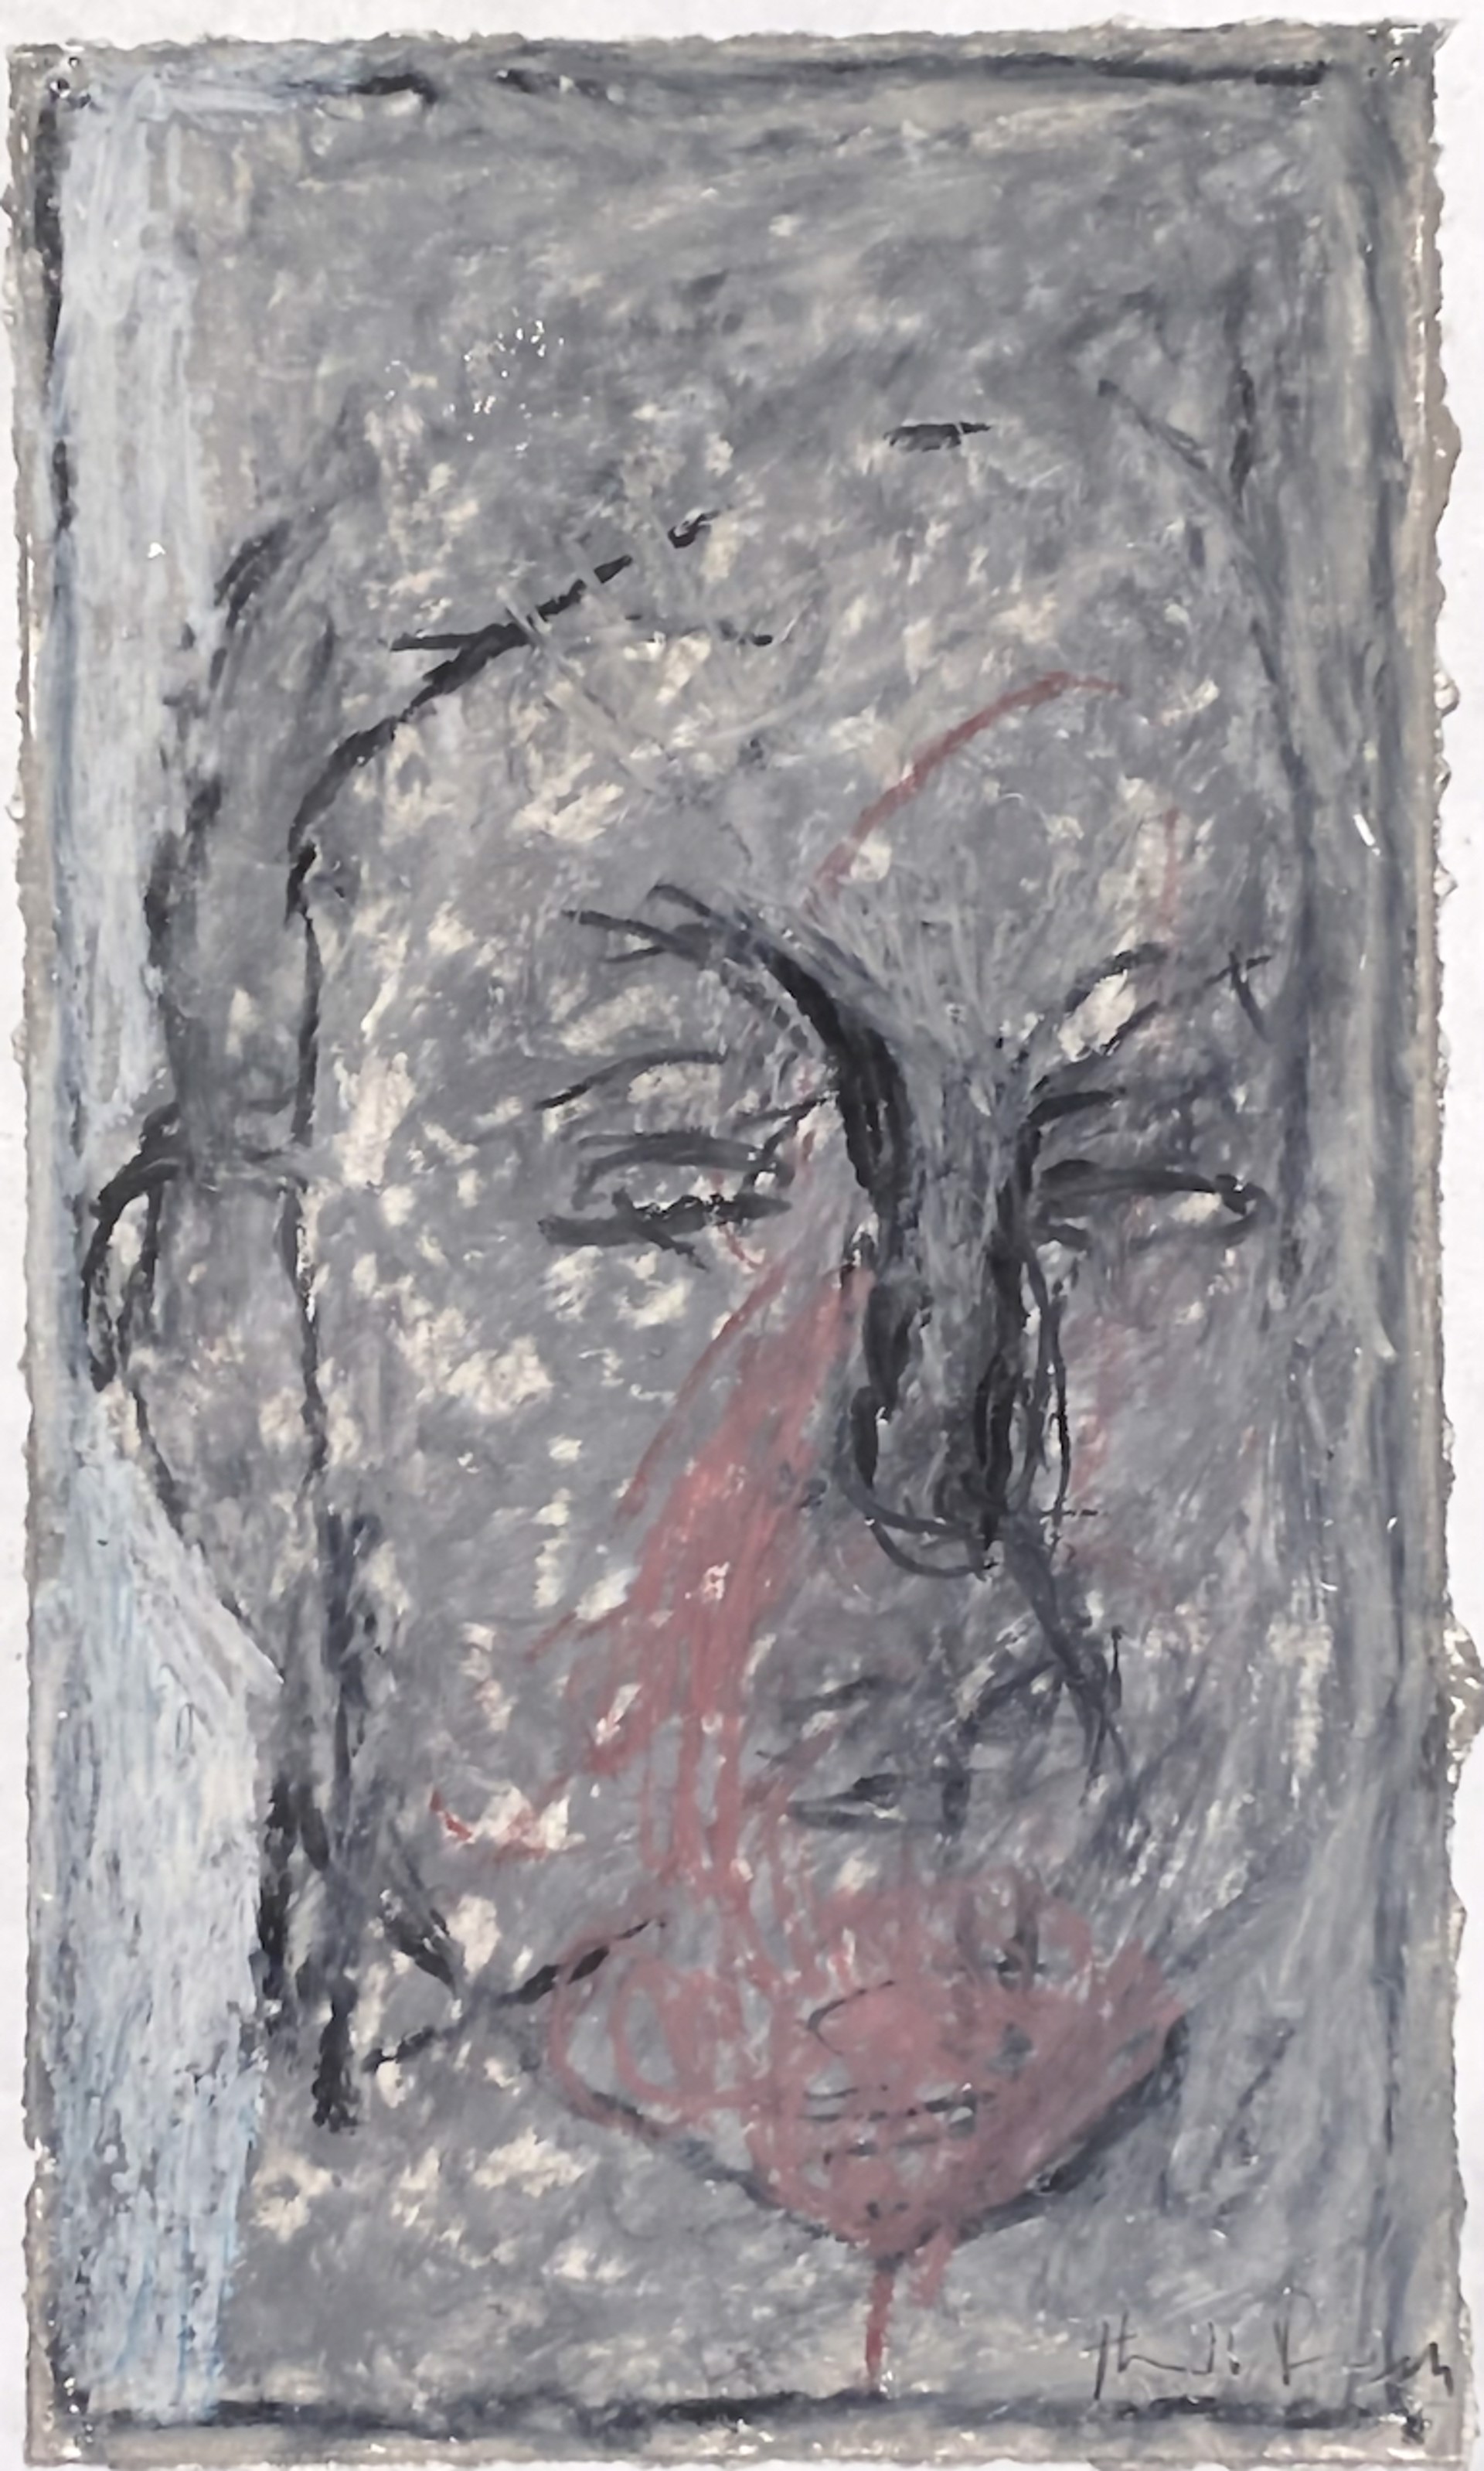 Drawings from Mt Gretna: Head VIII by Thaddeus Radell